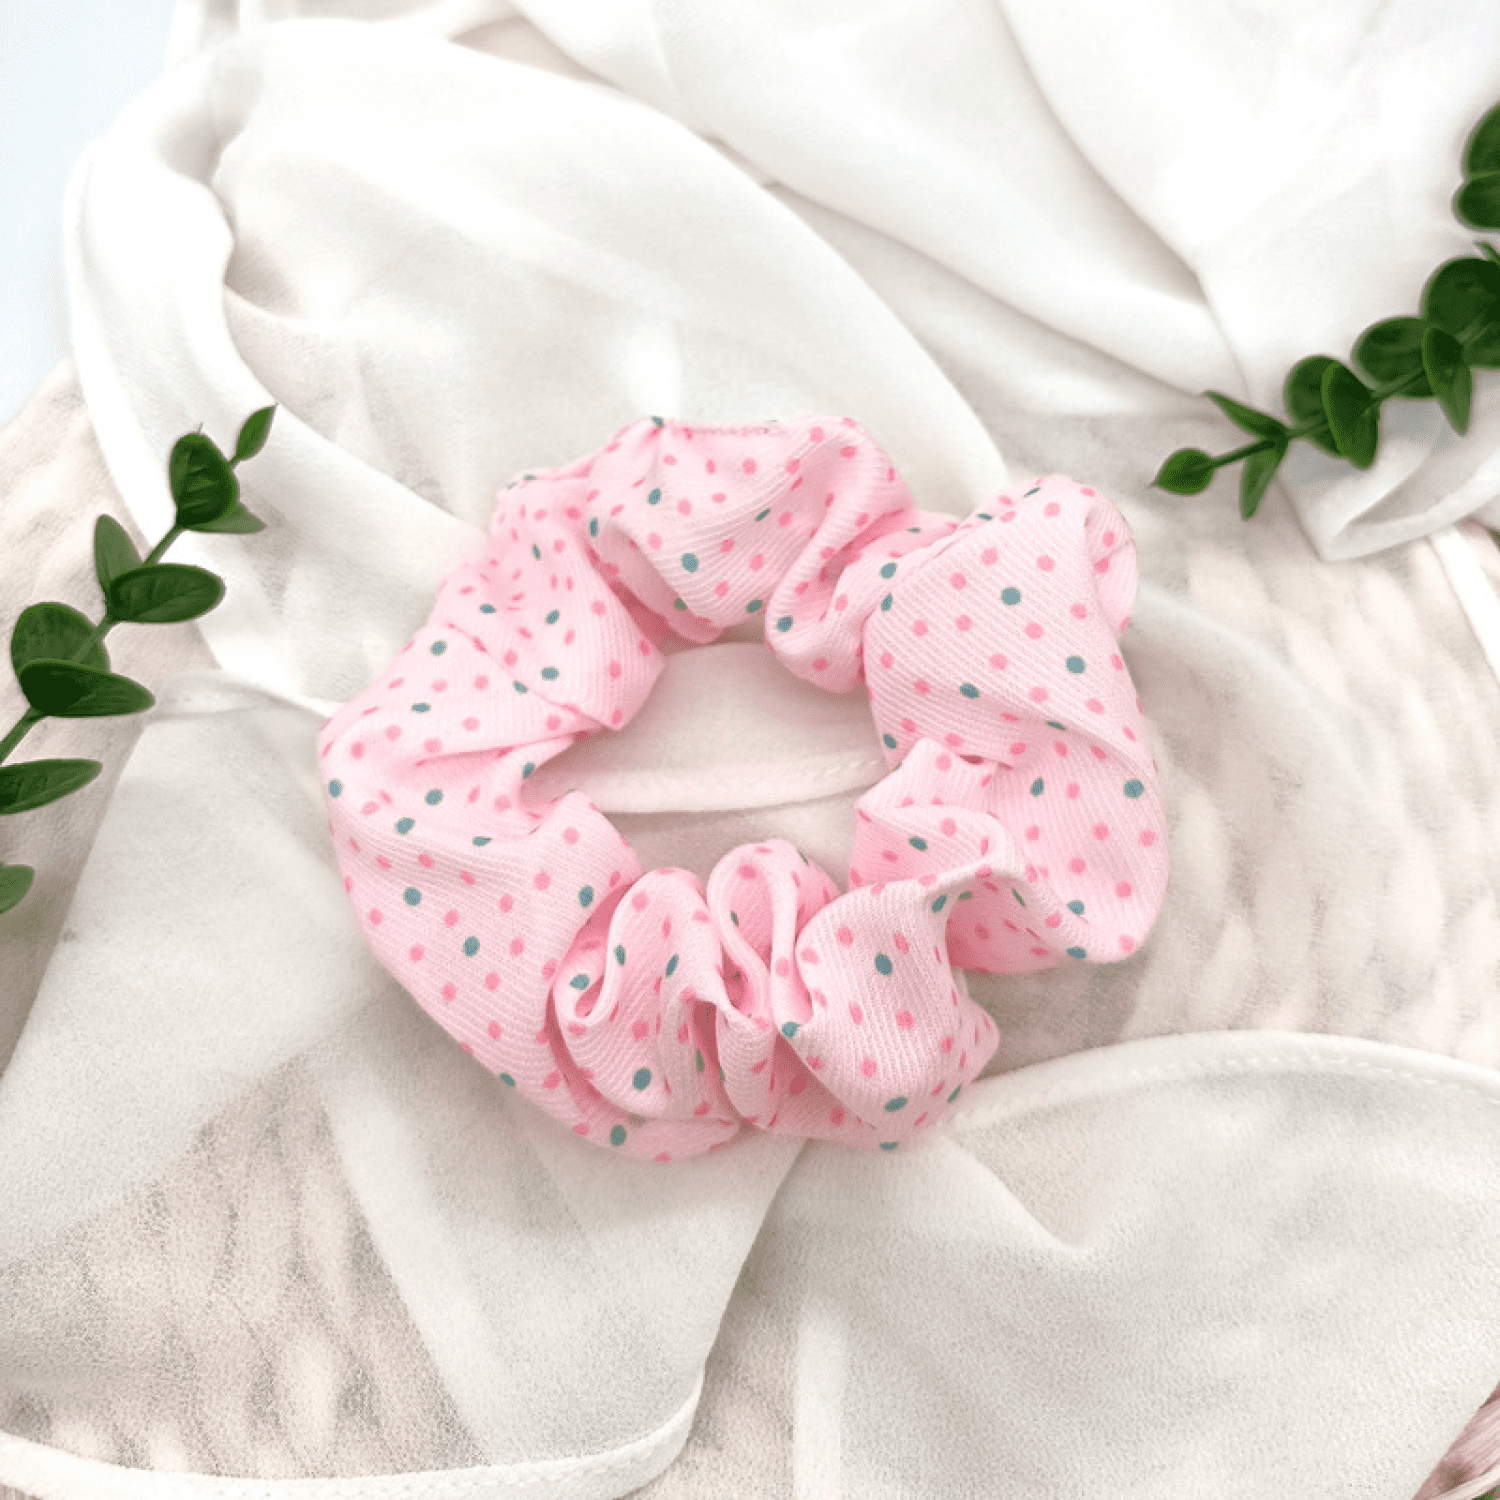 Purple and White Dot Scrunchie and Headband Summer Hair Accessories Soft and Smooth | Hair Care Soft Scrunchie Top Knot Headband